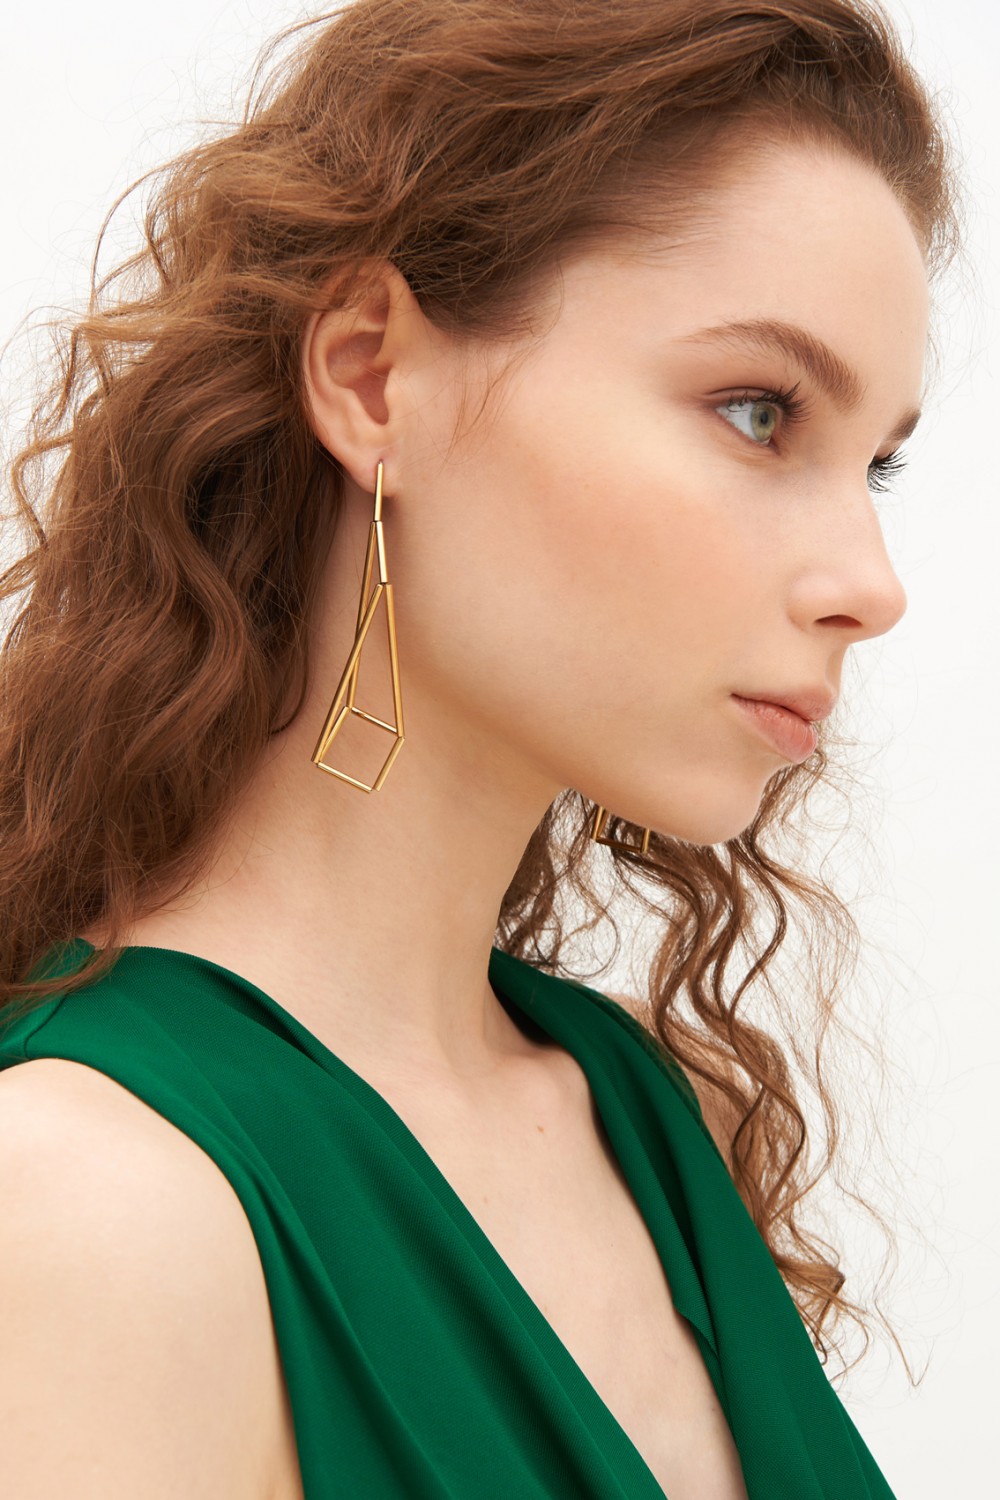 Gold earrings in the shape of origami